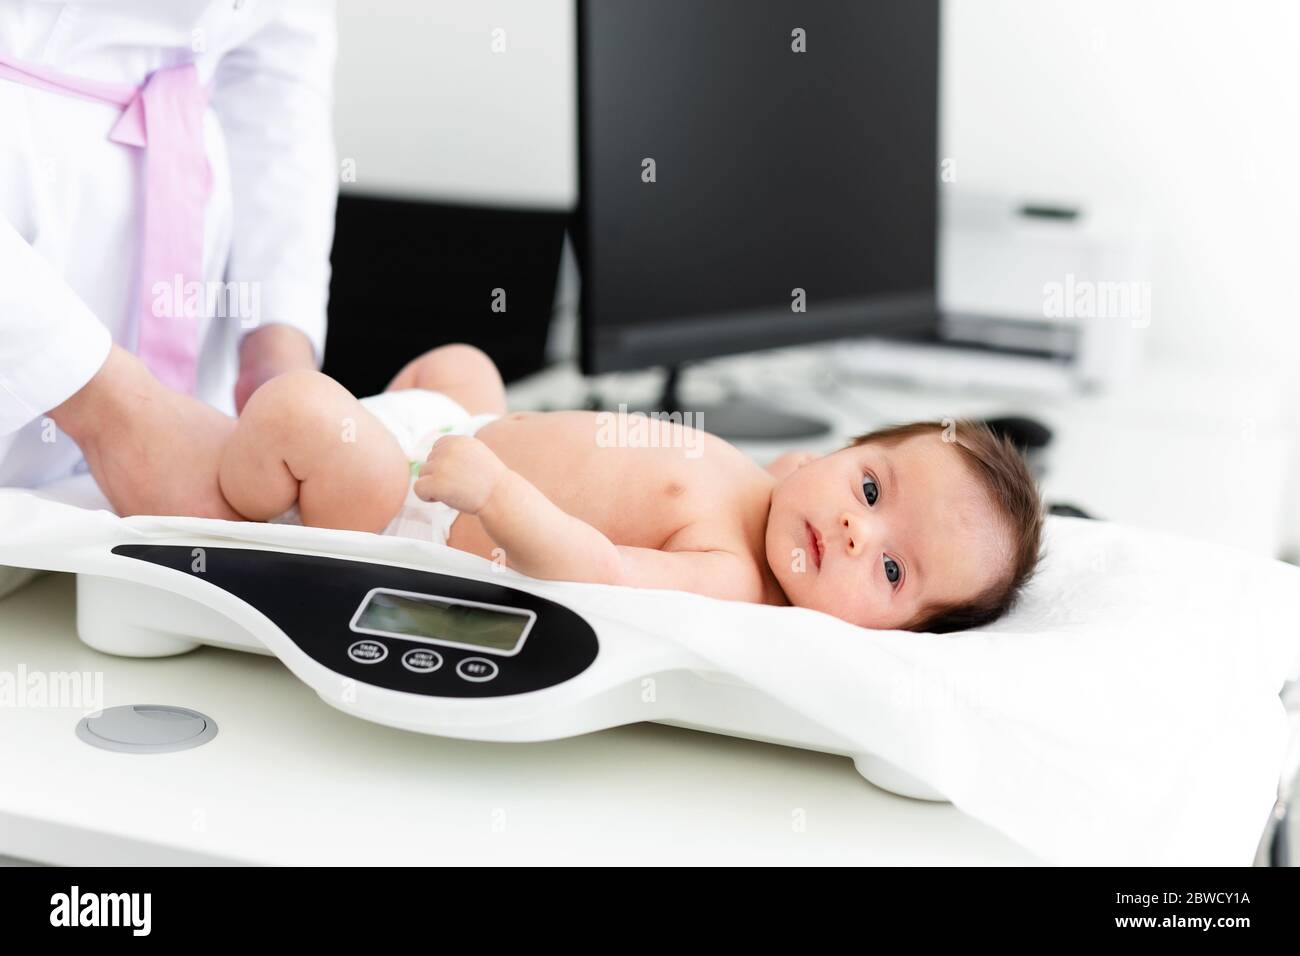 https://c8.alamy.com/comp/2BWCY1A/close-up-of-a-doctor-checking-weight-of-cute-little-baby-healthcare-concept-2BWCY1A.jpg